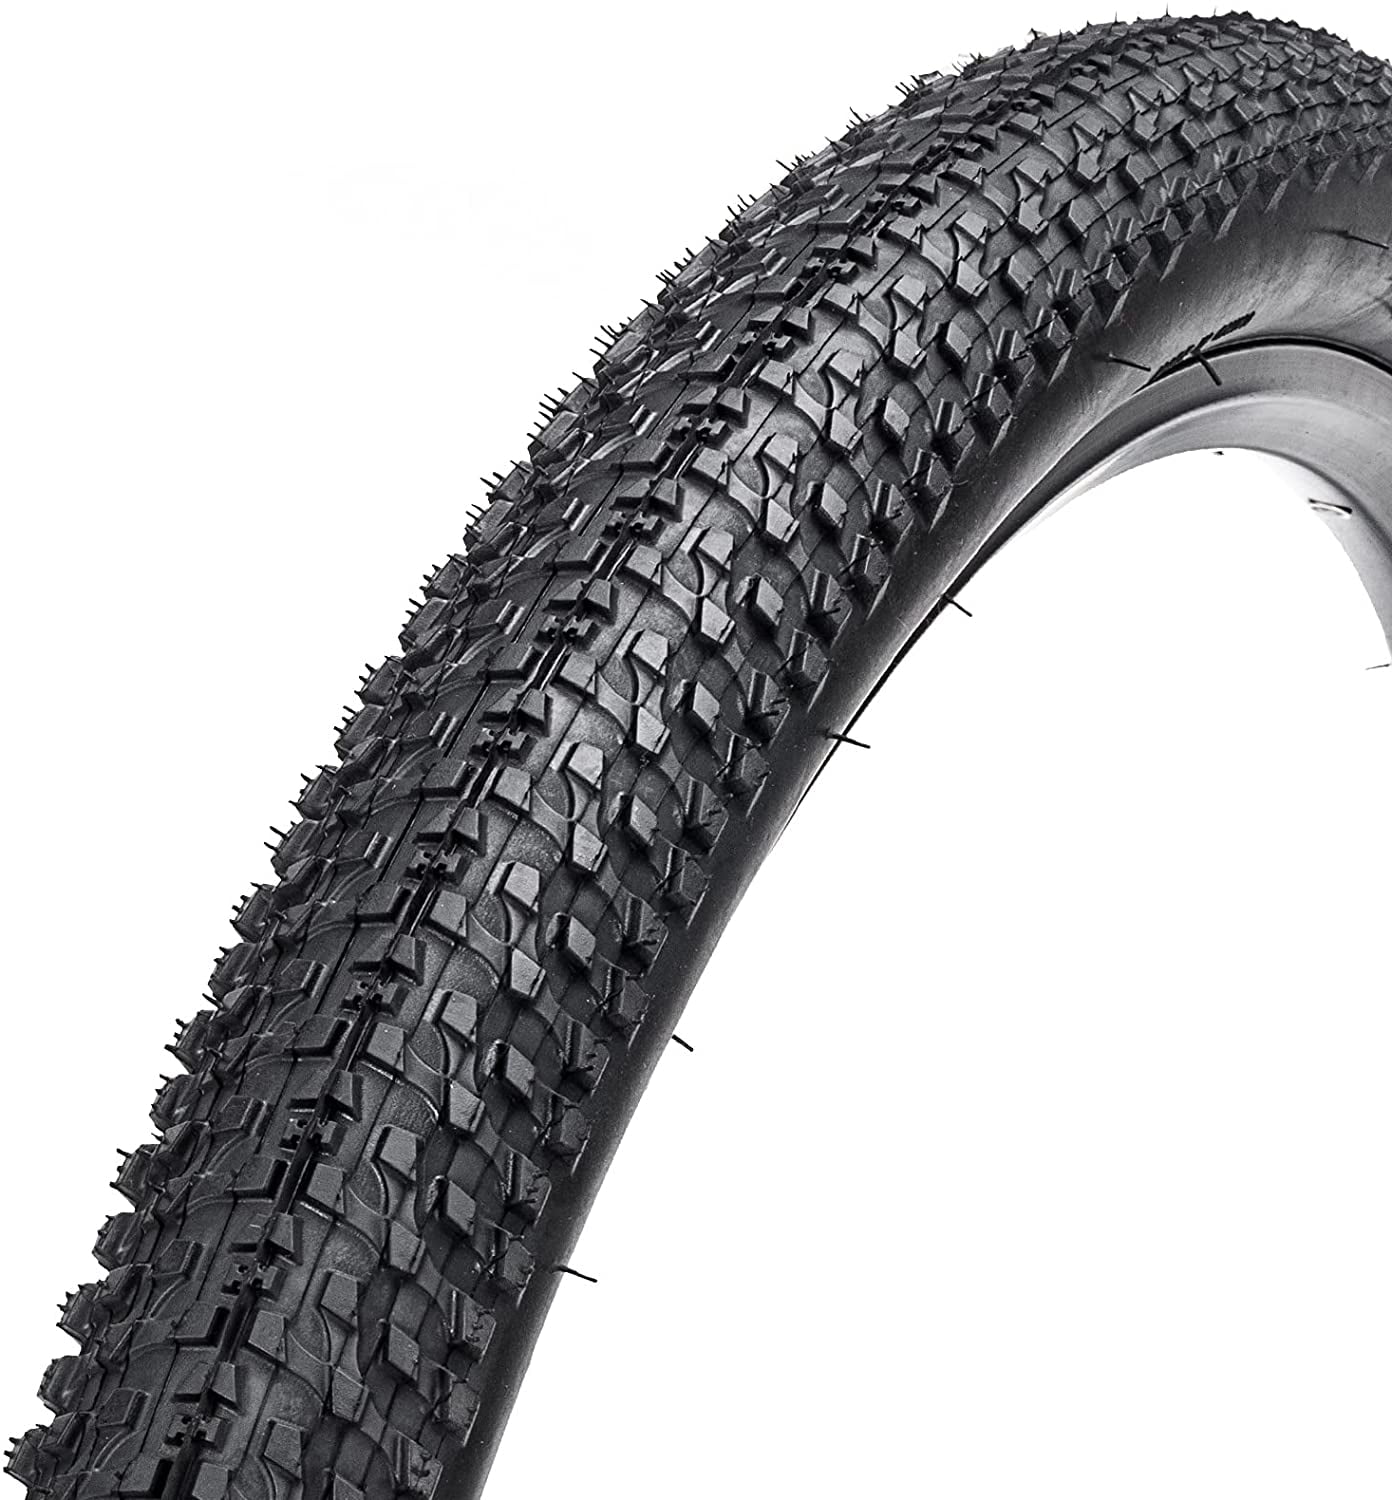 KENDA Mountain Bike Tires 24/26*2.1" Cross Country Durable Clincher Bicycle Tyre 